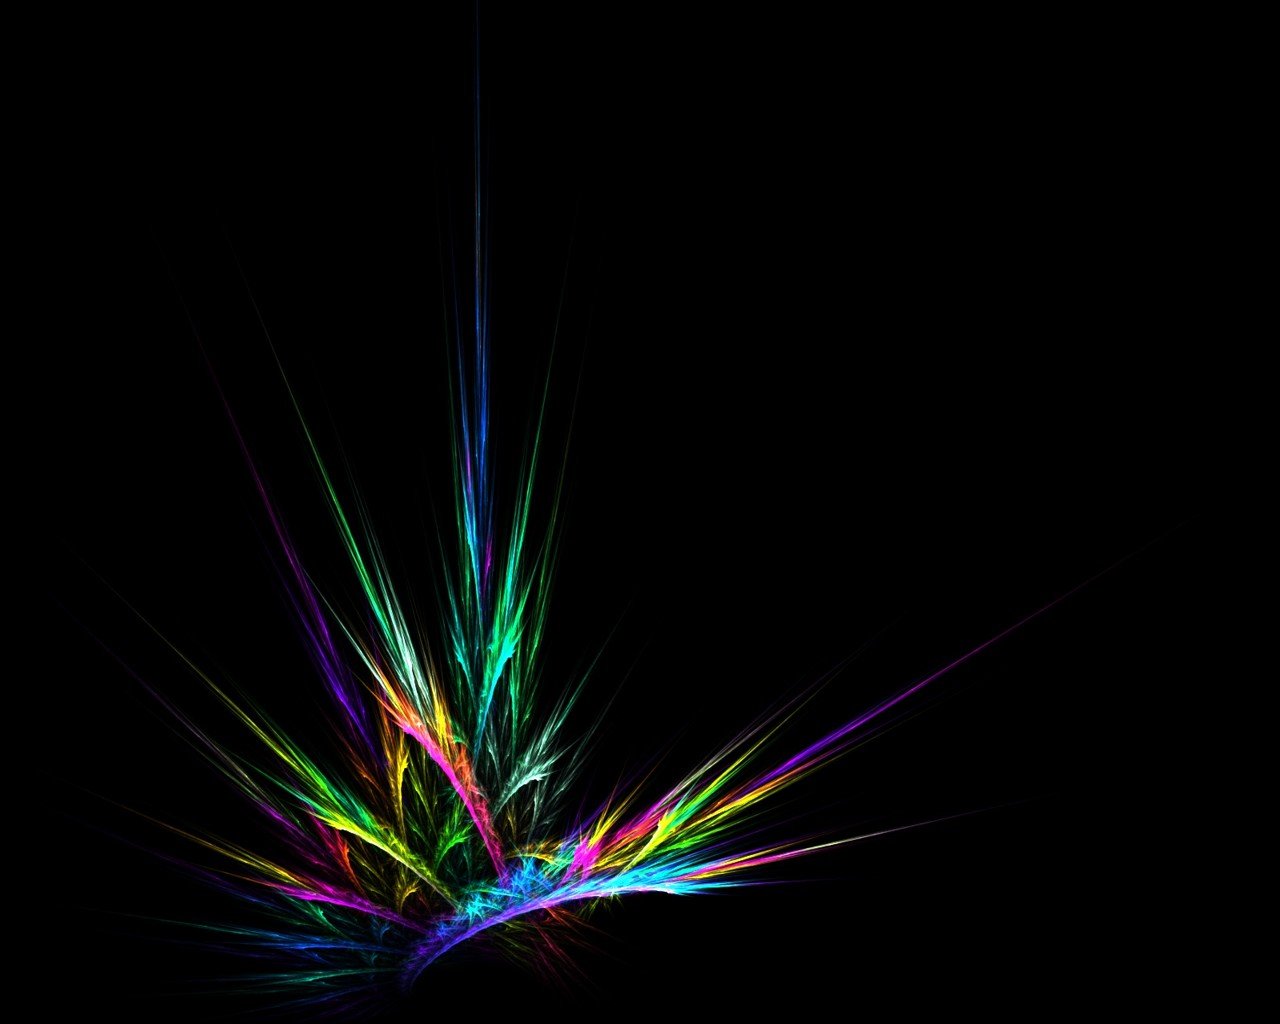 Black Abstract Wallpaper 2204 Hd Wallpapers in Abstract   Imagescicom 1280x1024